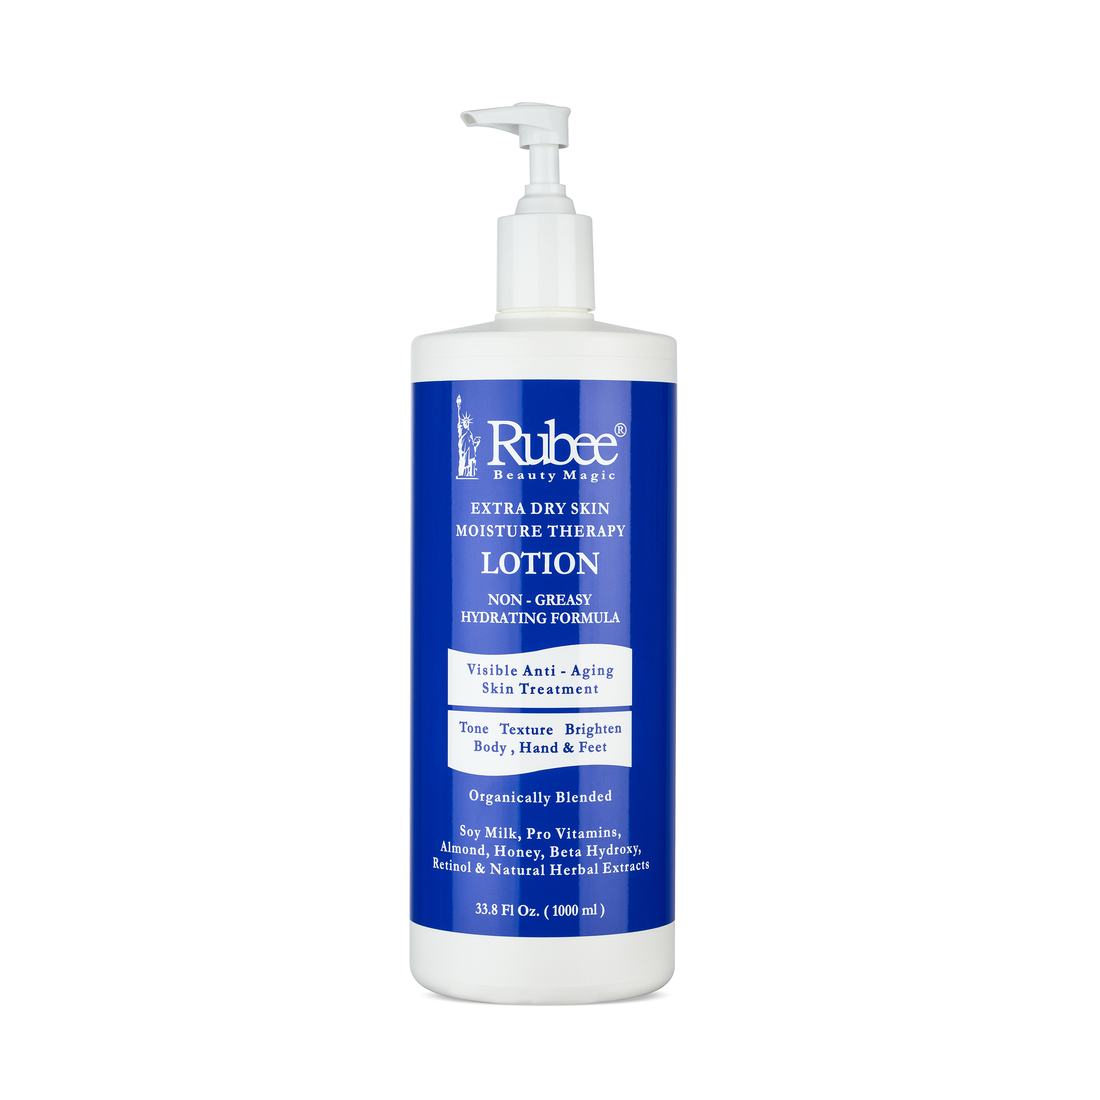 Extra Dry Skin Moisture Therapy Lotion